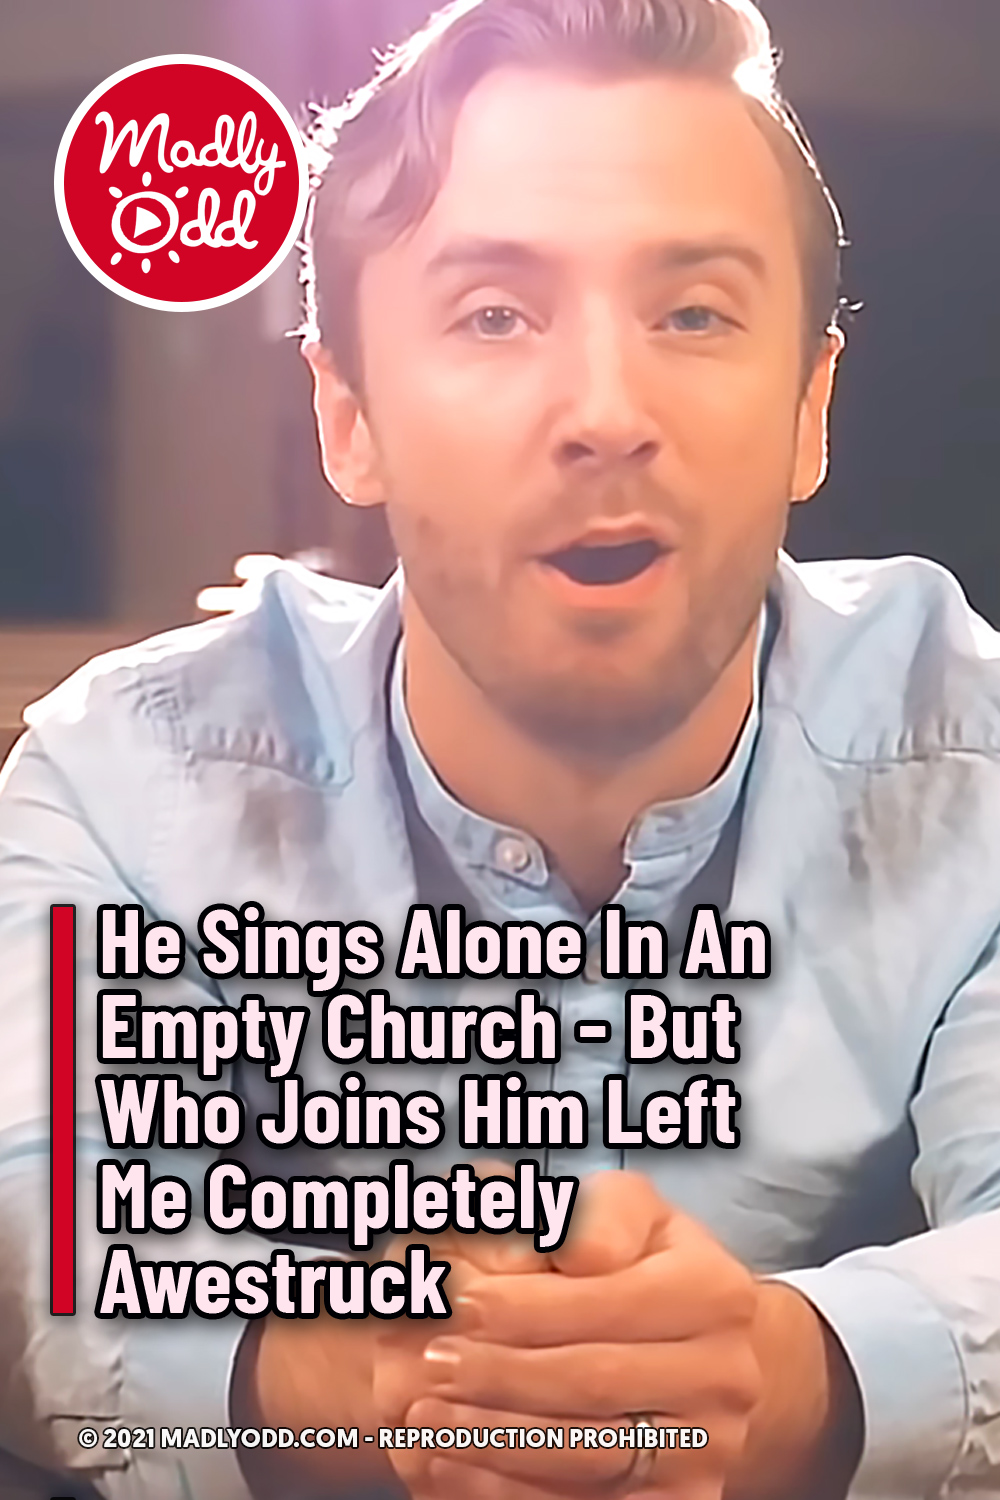 He Sings Alone In An Empty Church - But Who Joins Him Left Me Completely Awestruck